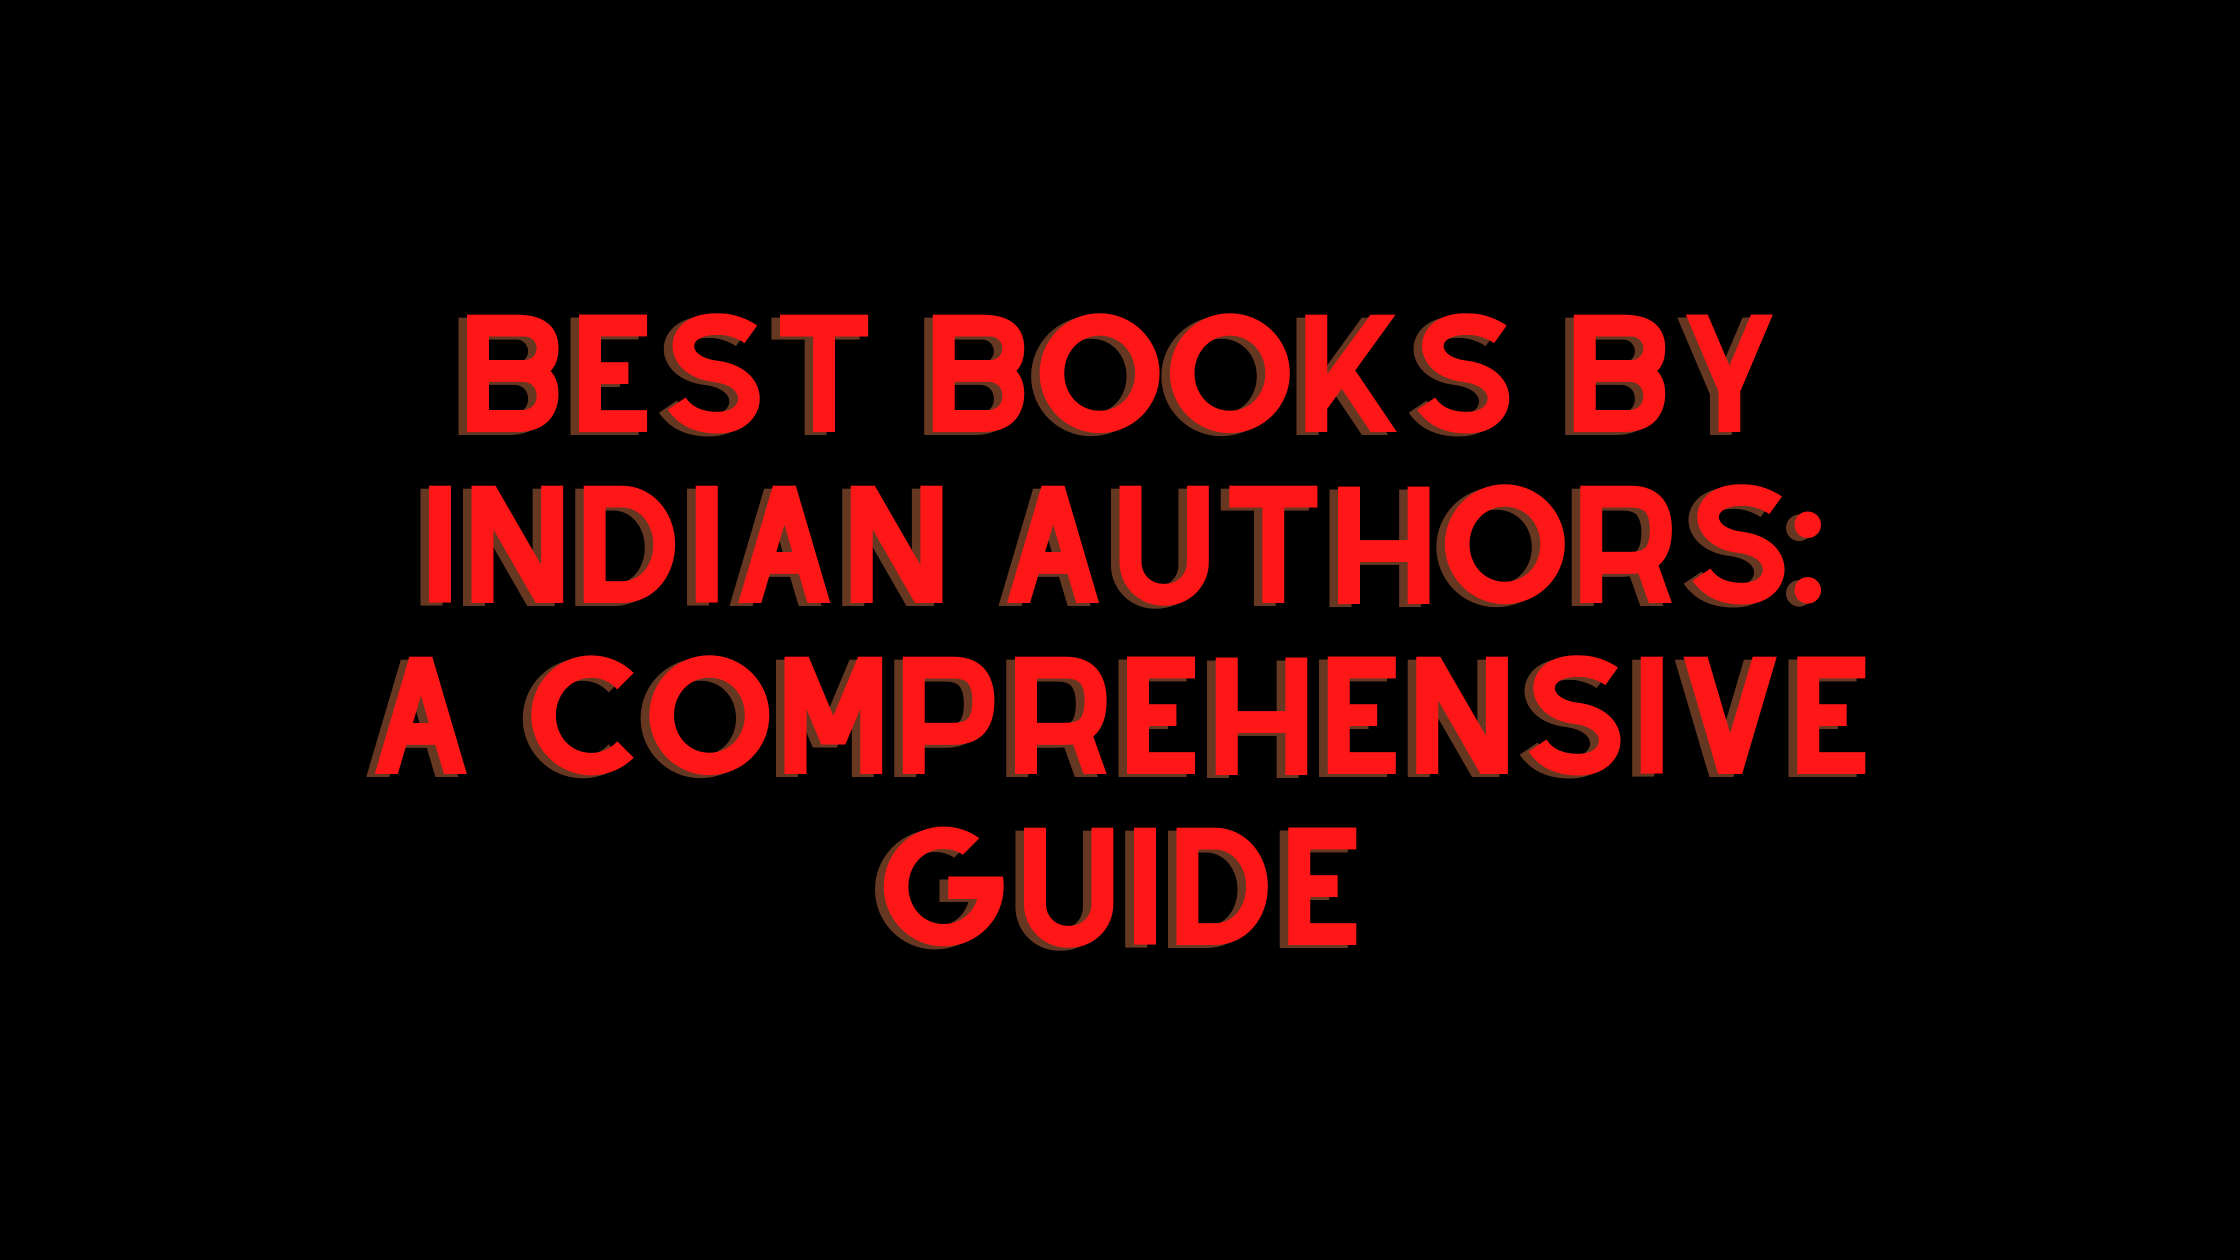 Best Books By Indian Authors: A Comprehensive Guide